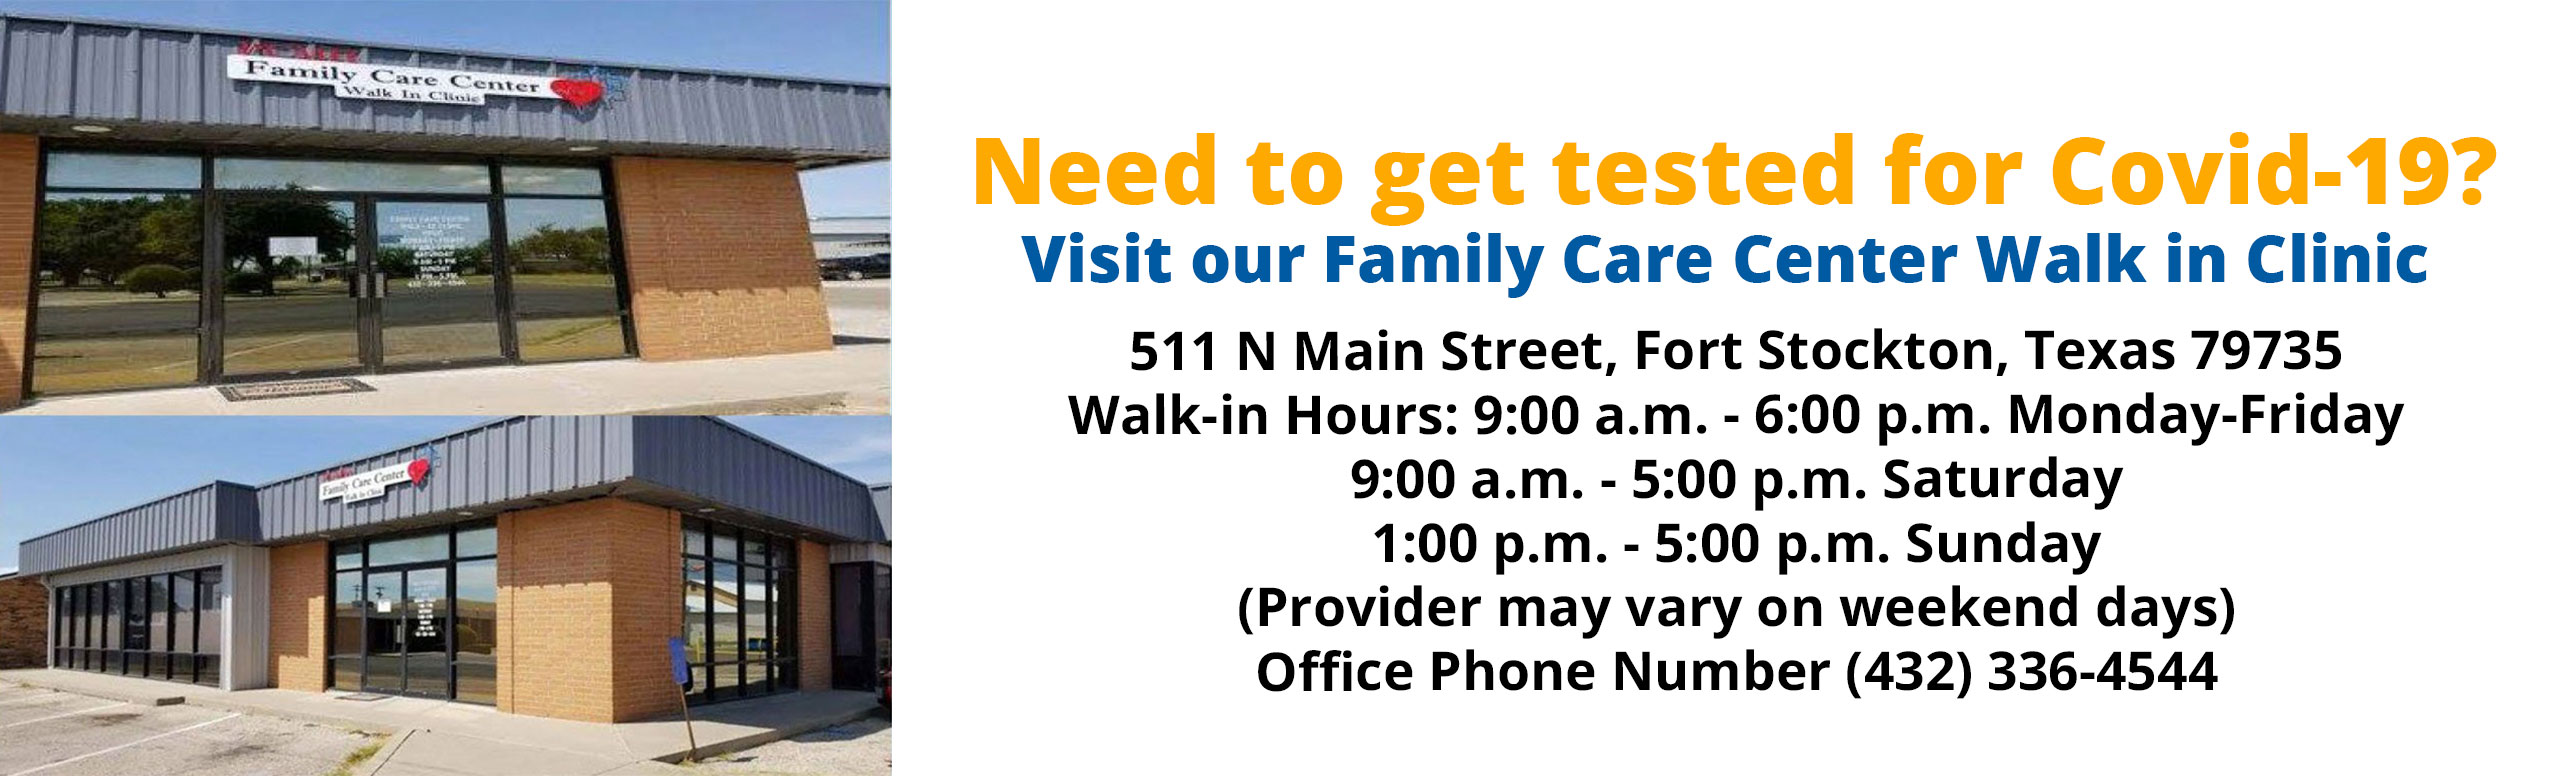 Banner picture of Pecos County Memorial Hospital Family Care Center Walk-In Clinic

Need to get tested for Covid-19?
Visit our Family Care Center Walk in Clinic

511 N Main Street, Fort Stockton, Texas 79735
Walk-in Hours: 9:00 a.m/ - 6:00 p.m.
Monday-Friday 
9:00 a.m. -  6:00 p.m. Sunday
(Provider may vary on weekend days)
Office Phone Number (432)336-4544